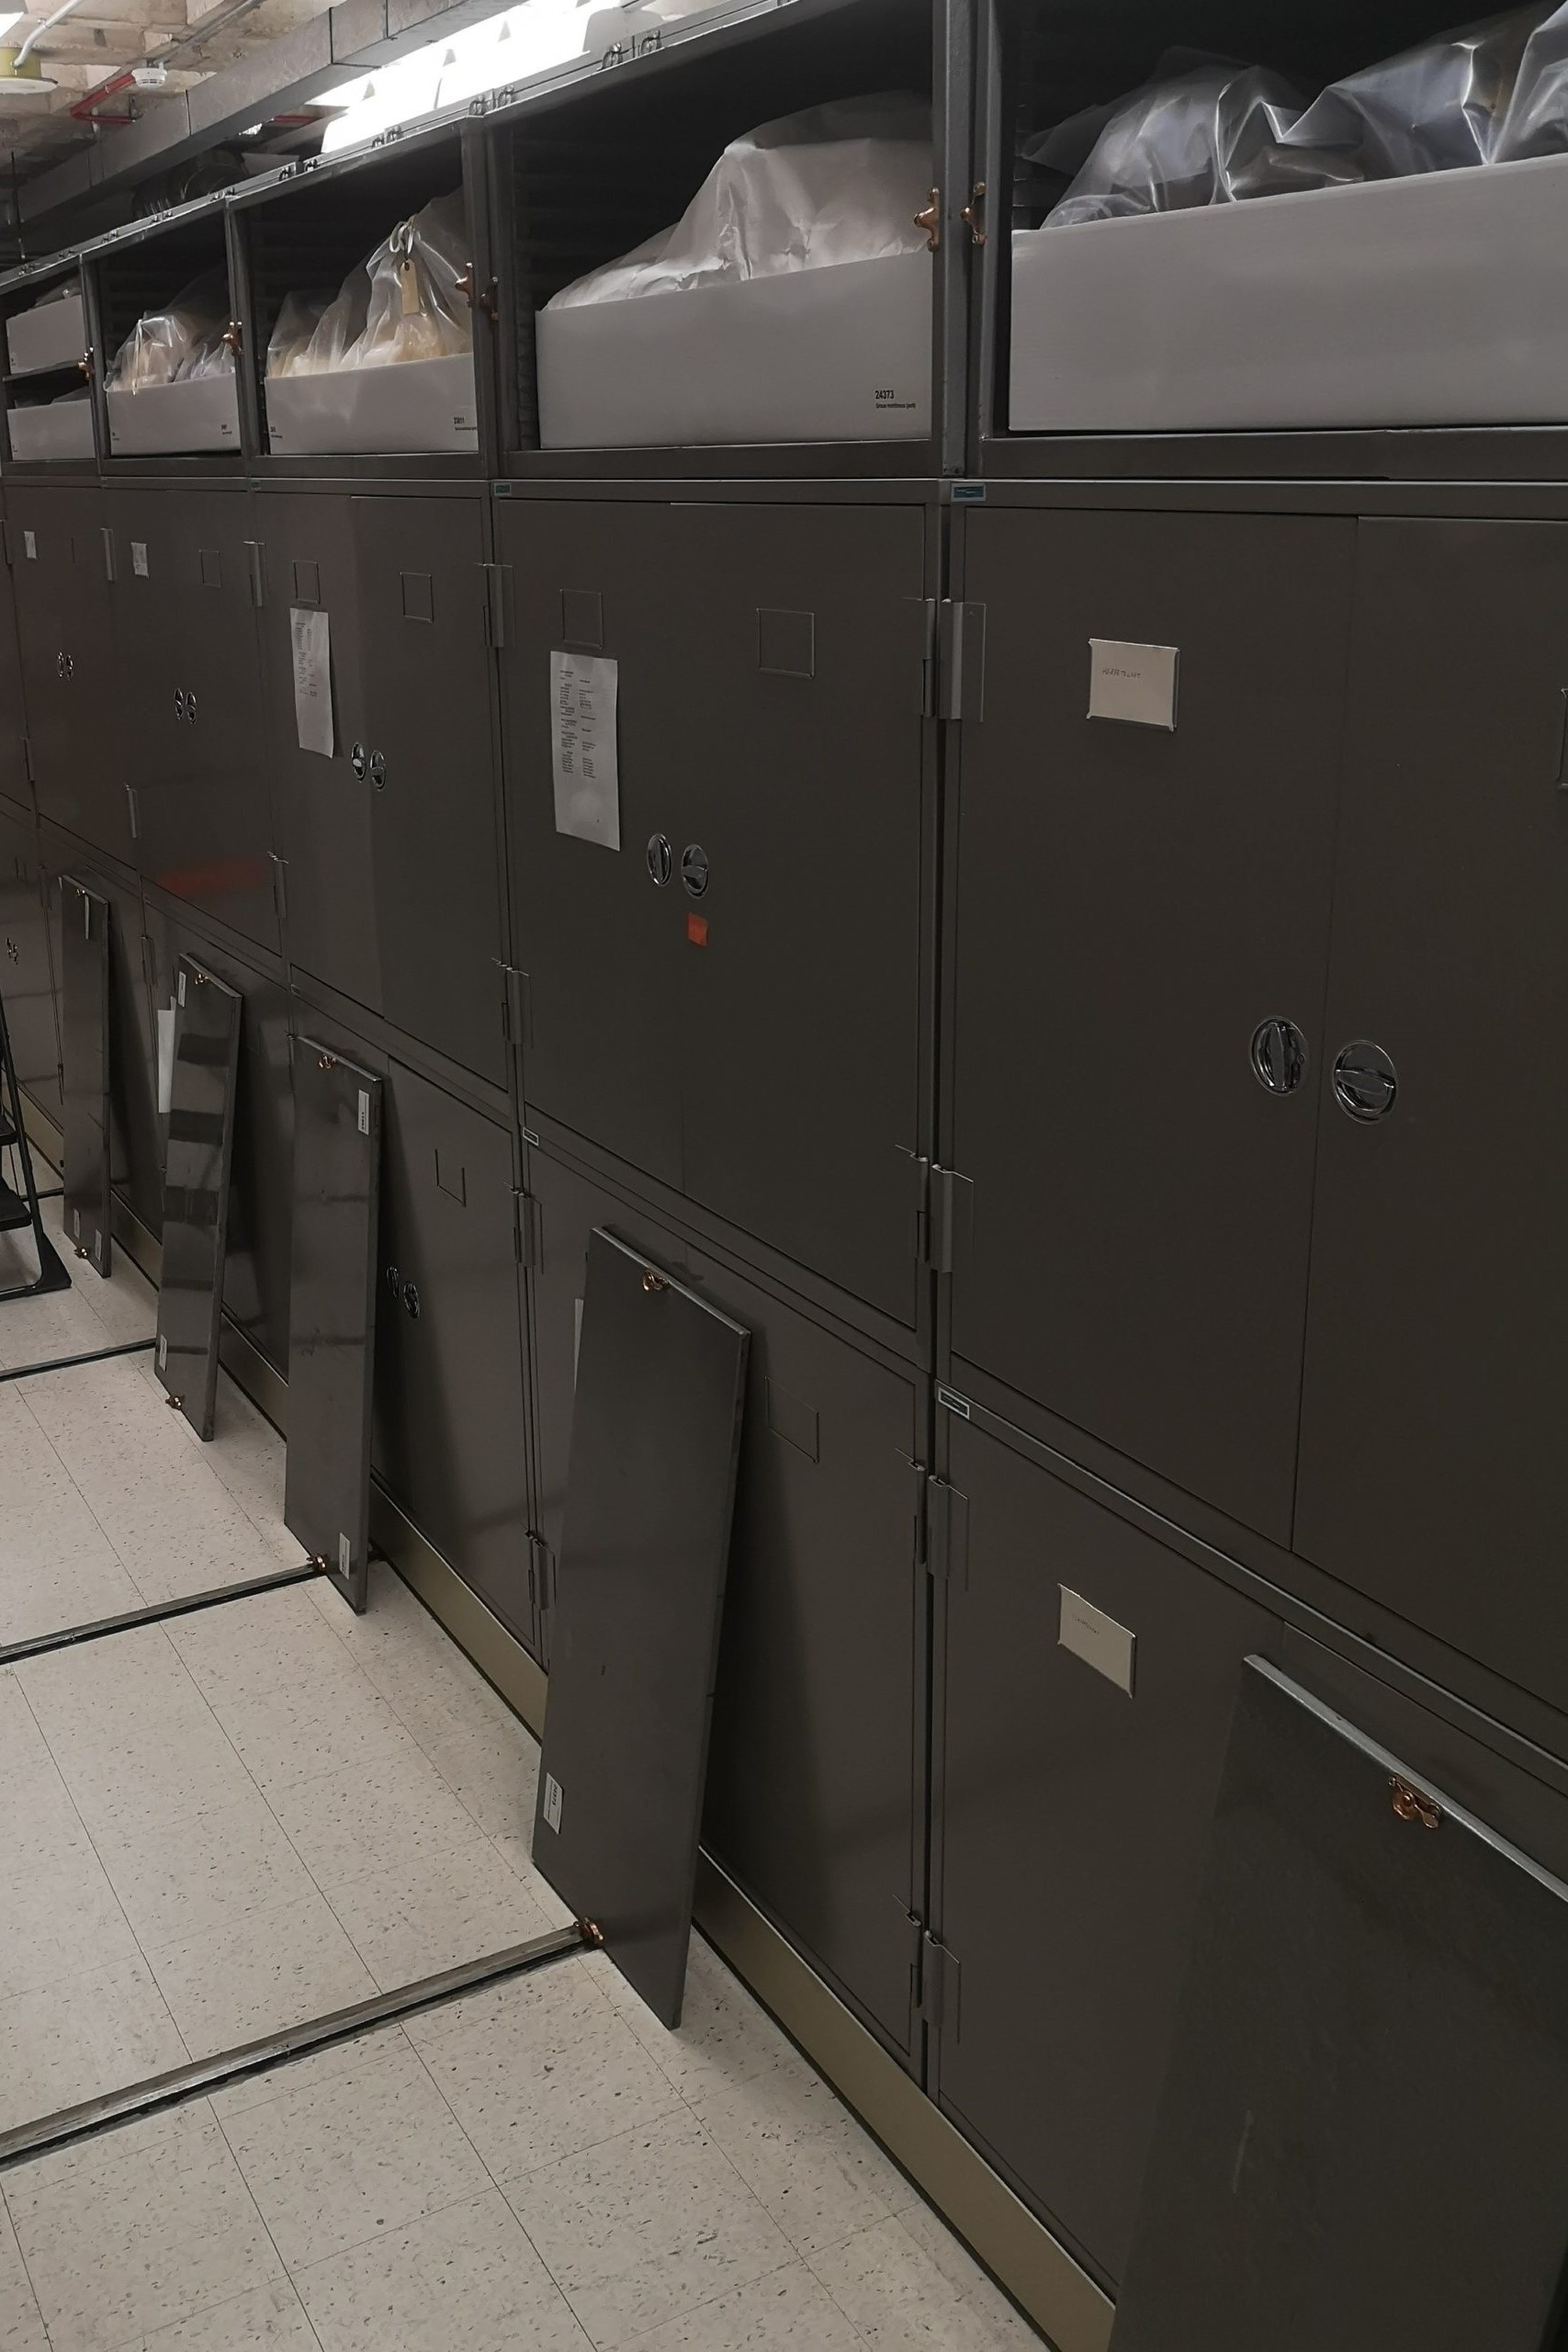 A row of dark metal storage cabinaets. The top cabinet doors are removed and lean against the floor. Inside each storage compartment is a box holding a carefully wrapped large animal skin.